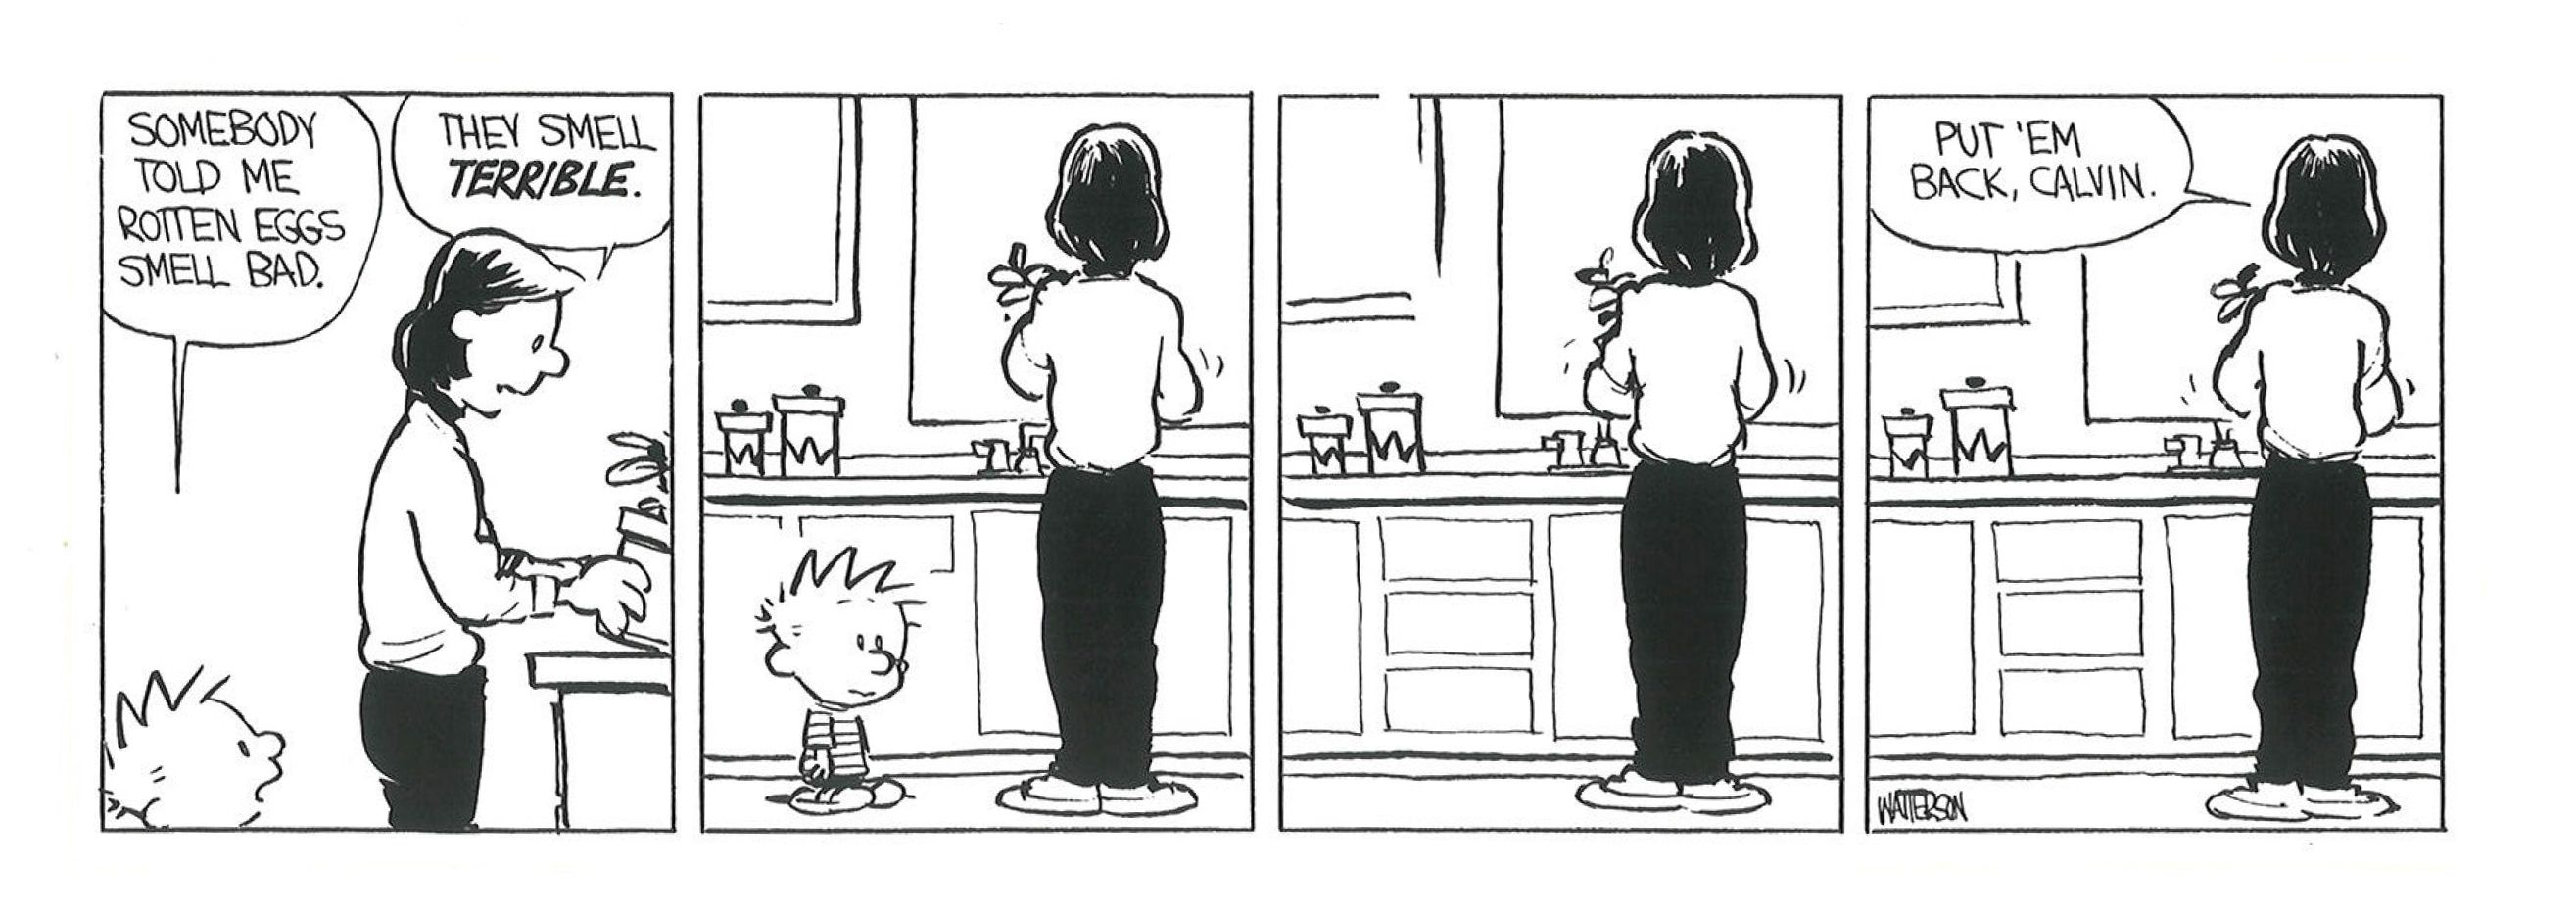 A Calvin and Hobbes strip where Calvin wonders just how bad rotten eggs smell.